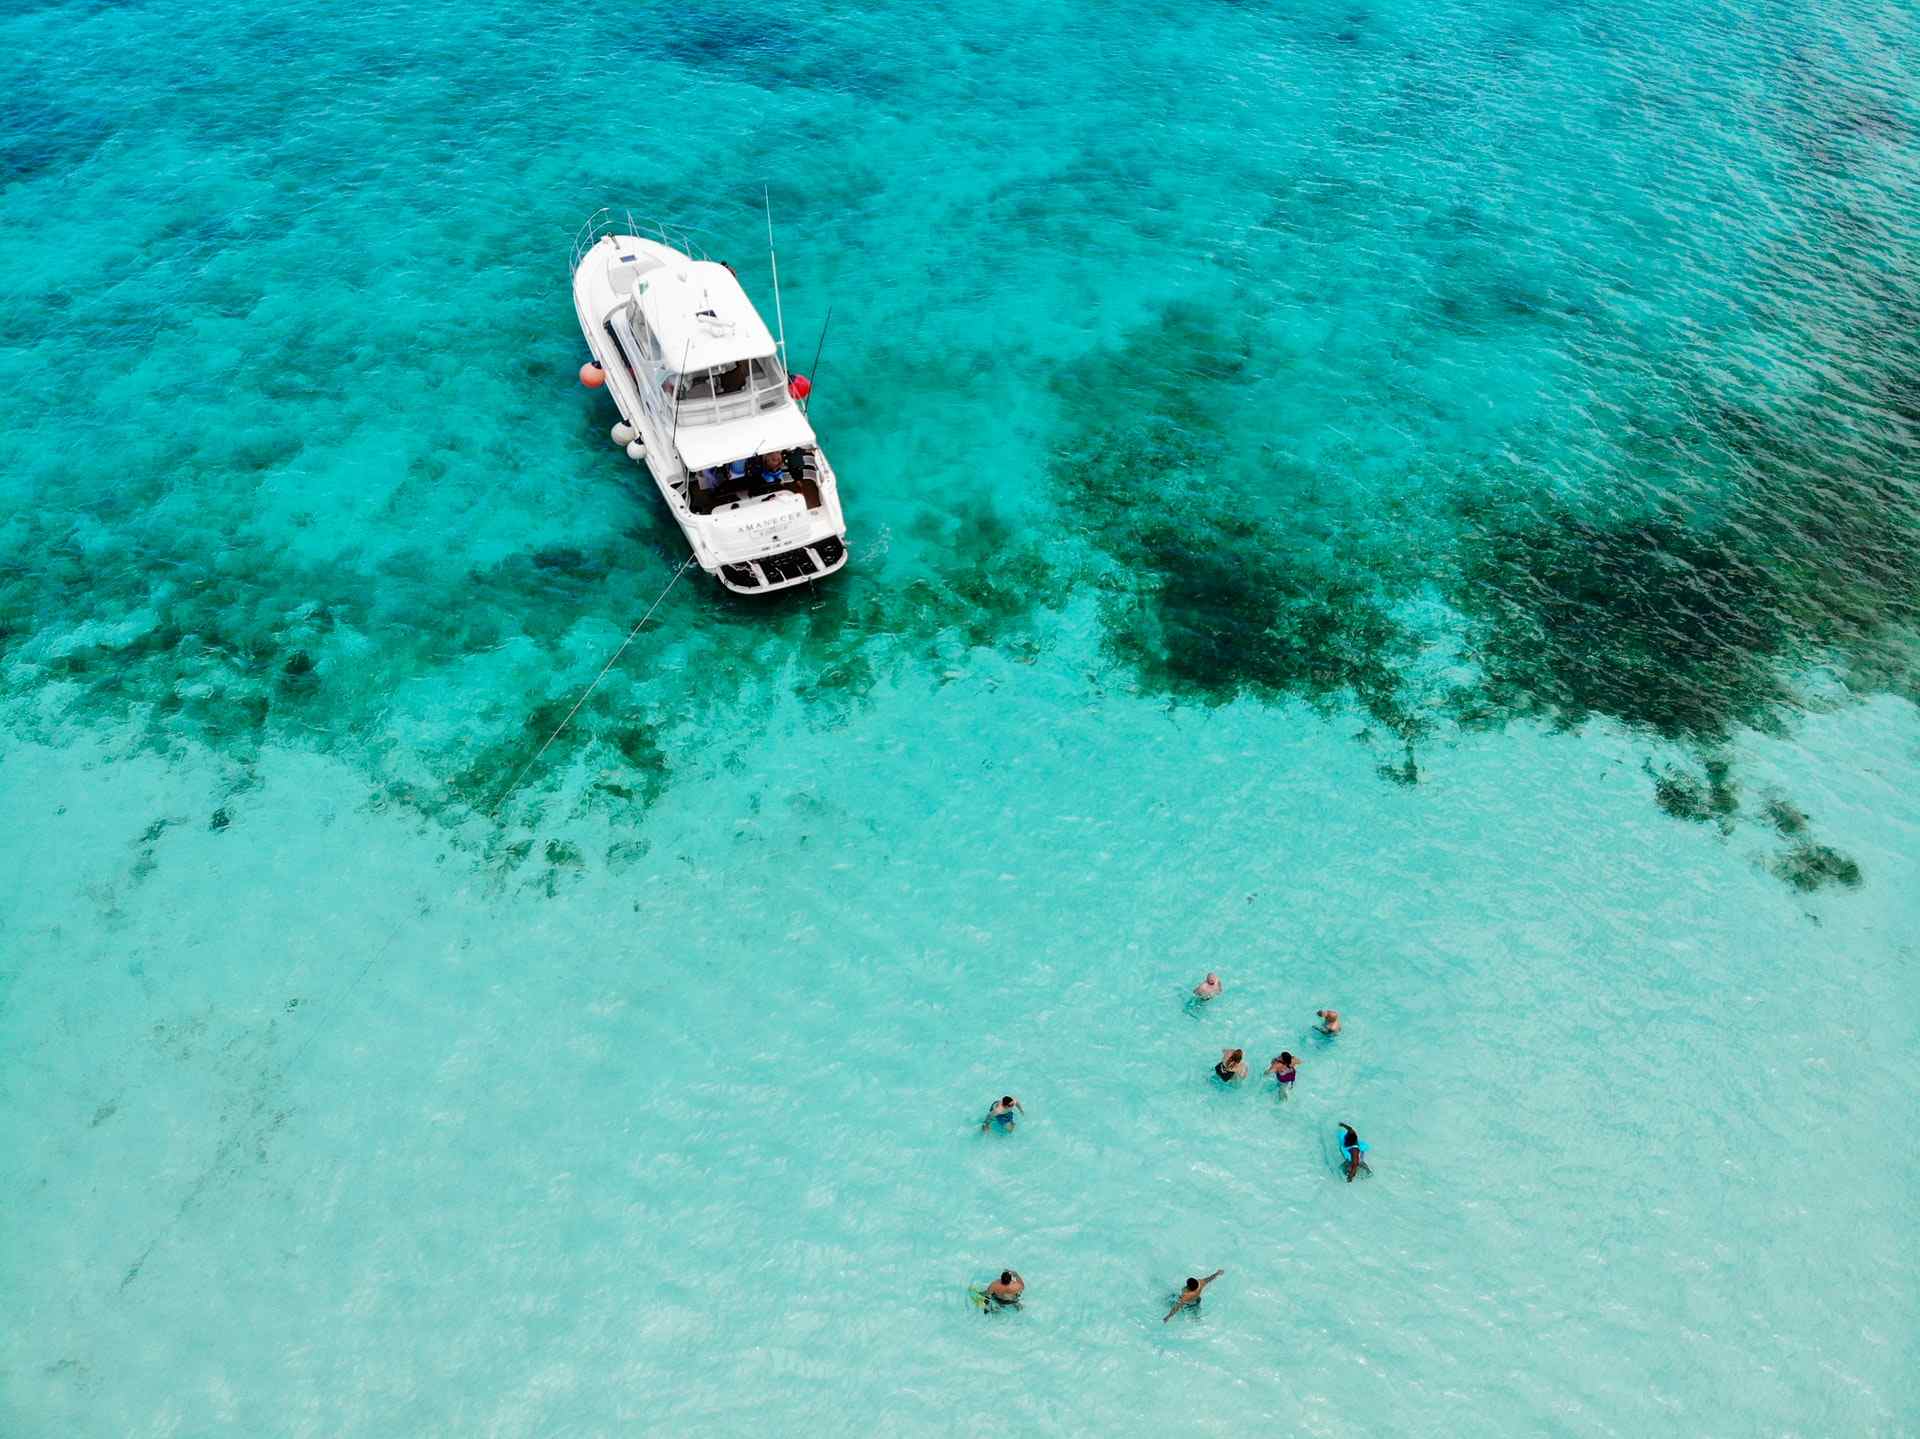 yacht and swimmers in tropical waters of Cozumel